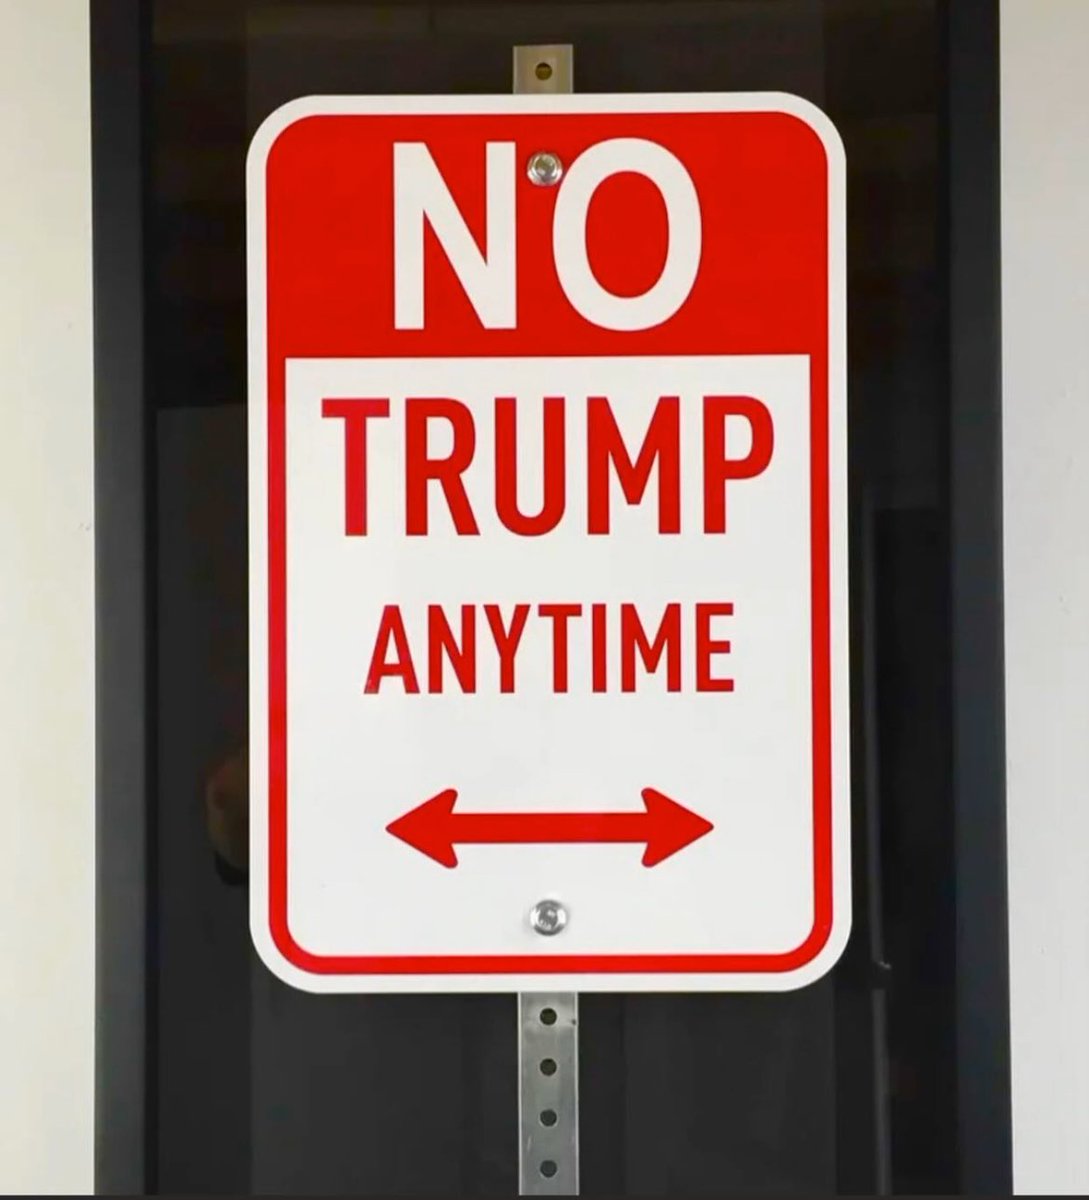 Good morning friends. Let’s make America a Trump Free Zone. What say you?